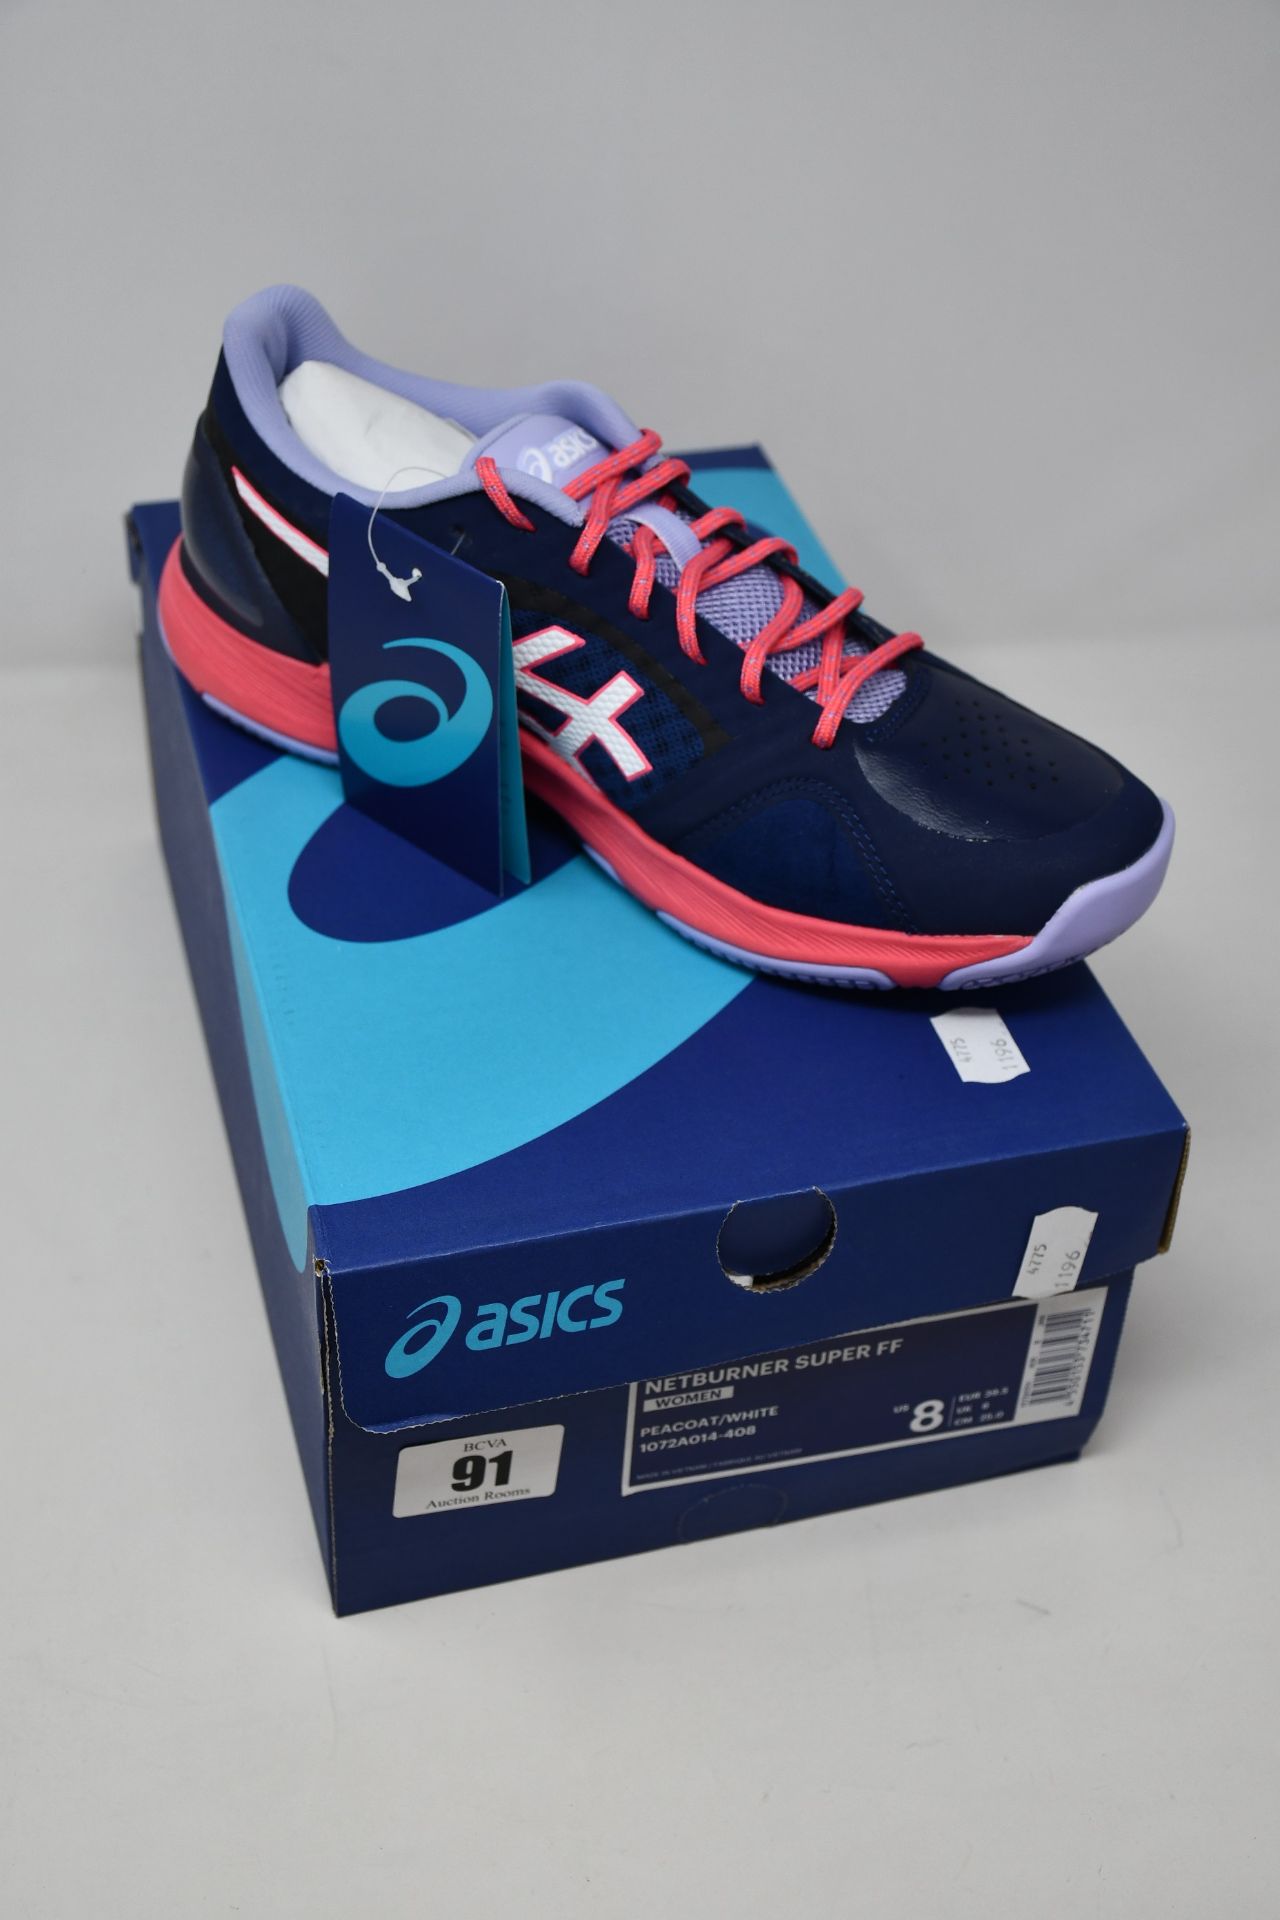 A pair of as new Asics Netburner Super FF trainers (UK 6).